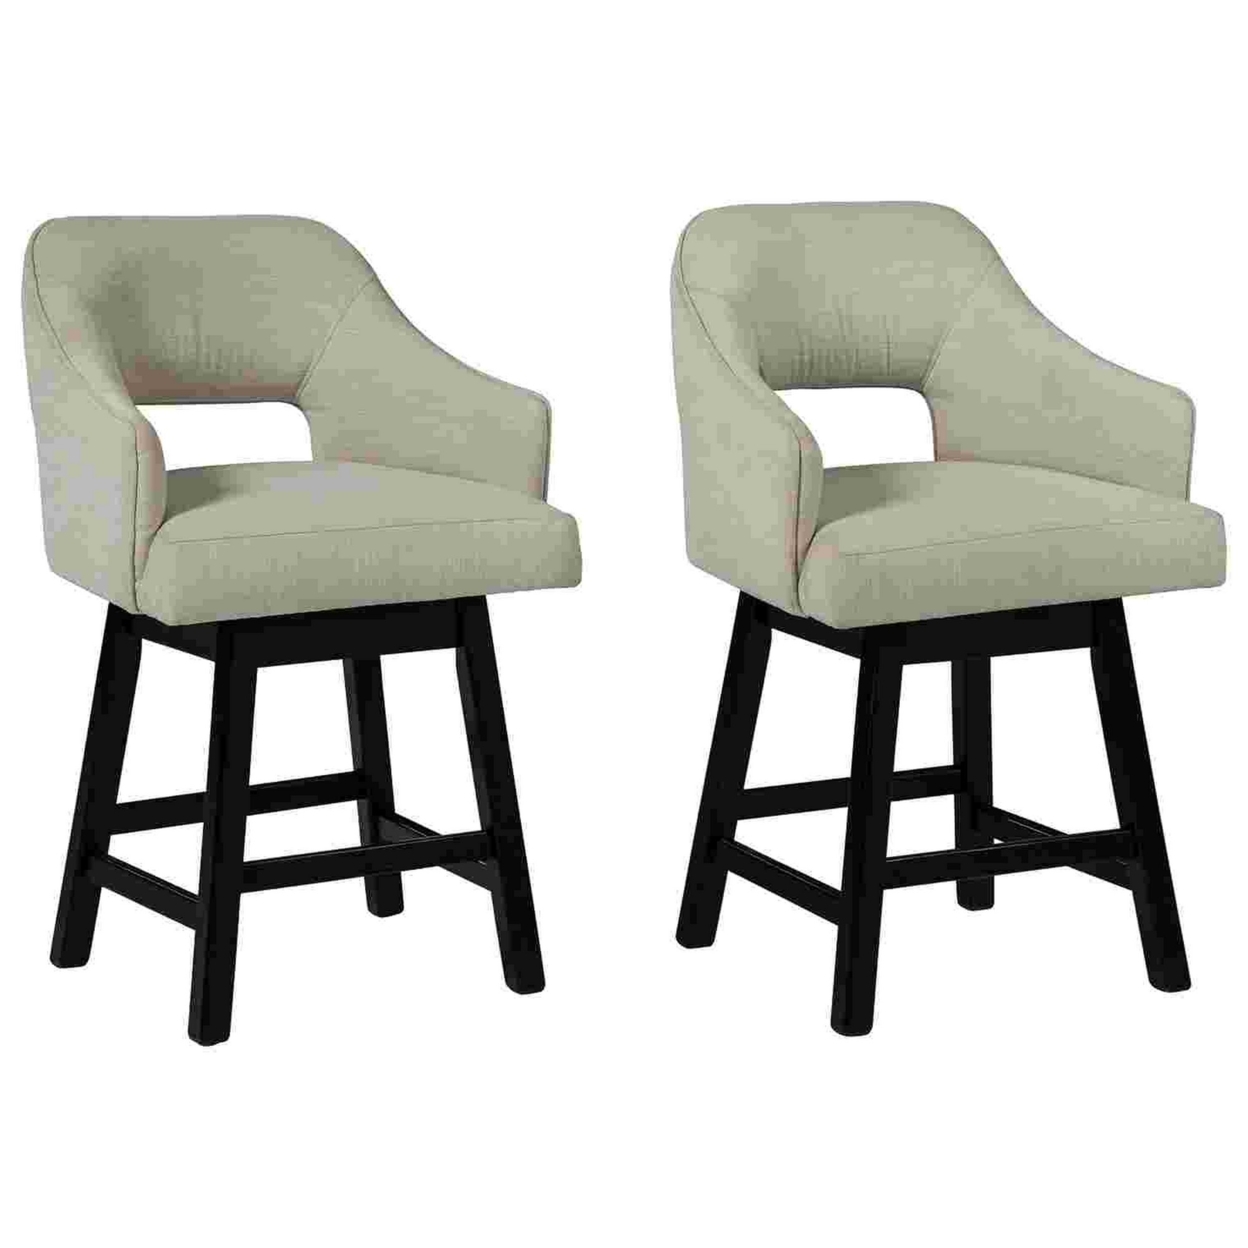 Swivel Barstool With Fabric And Countered Open Back, Set Of 2, Beige- Saltoro Sherpi